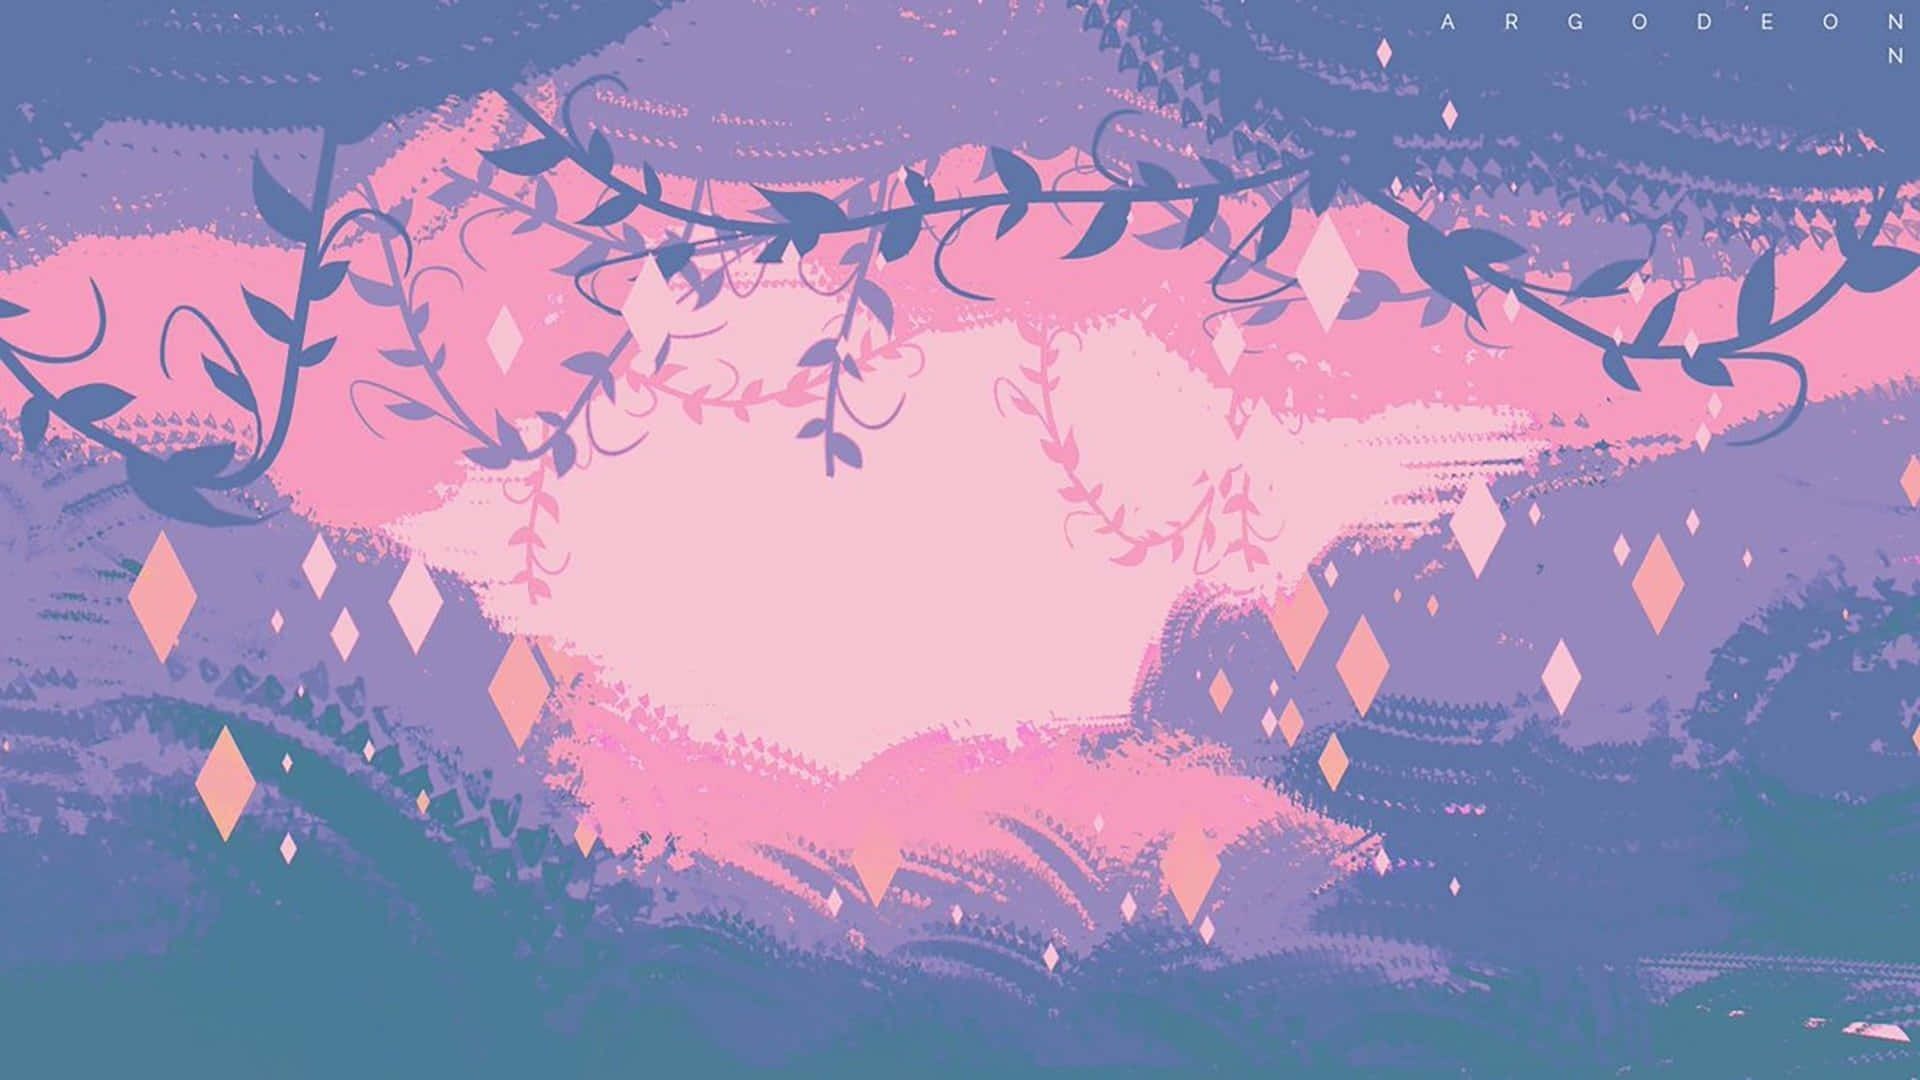 A colorful wallpaper with a pink and purple sky, diamonds, and vines. - Computer